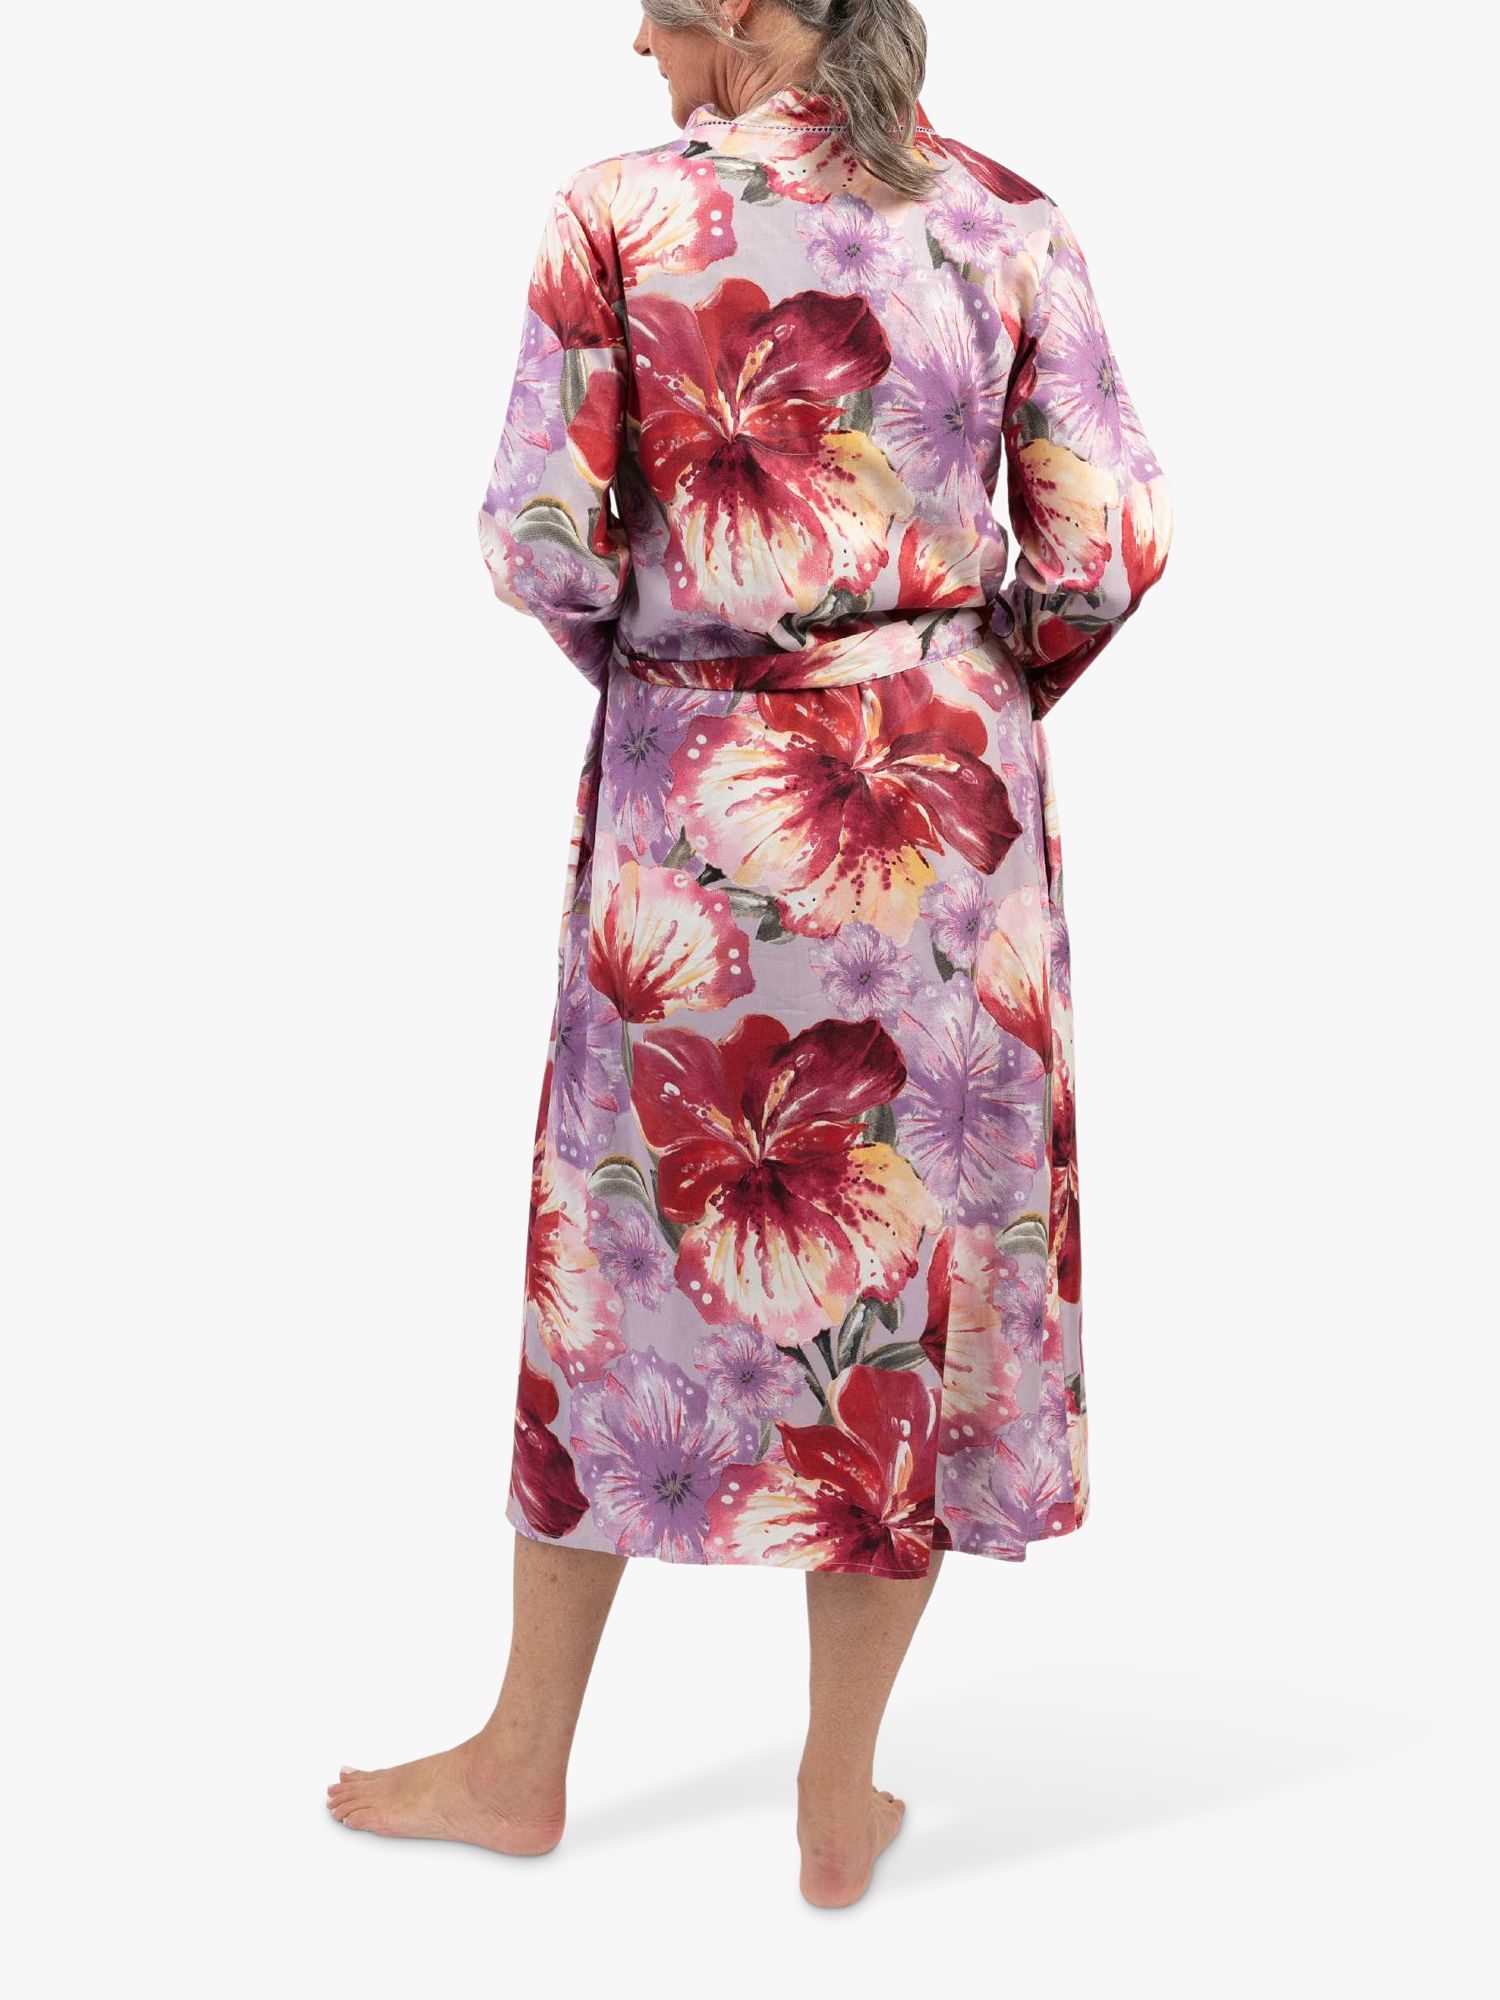 Buy Nora Rose by Cyberjammies Maeve Floral Print Dressing Gown Online at johnlewis.com